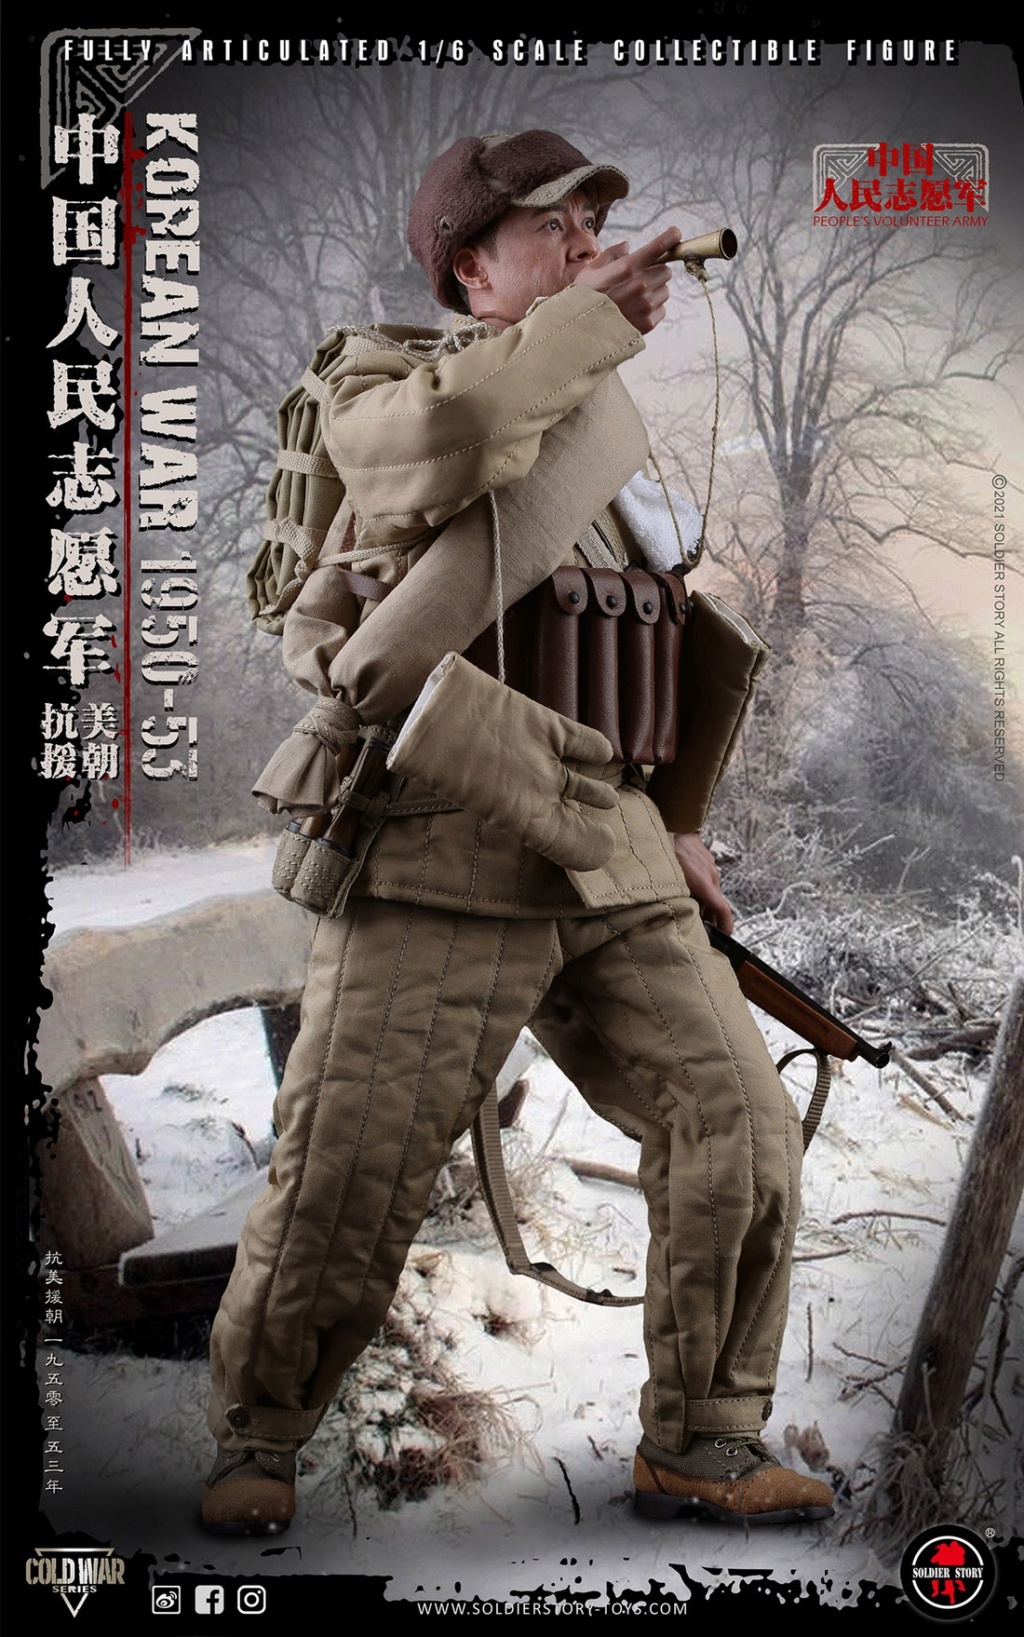 Soldierstory - NEW PRODUCT: SOLDIER STORY: 1/6 Chinese People’s Volunteers 1950-53 Collectible Action Figure (#SS-124) 0daa1410